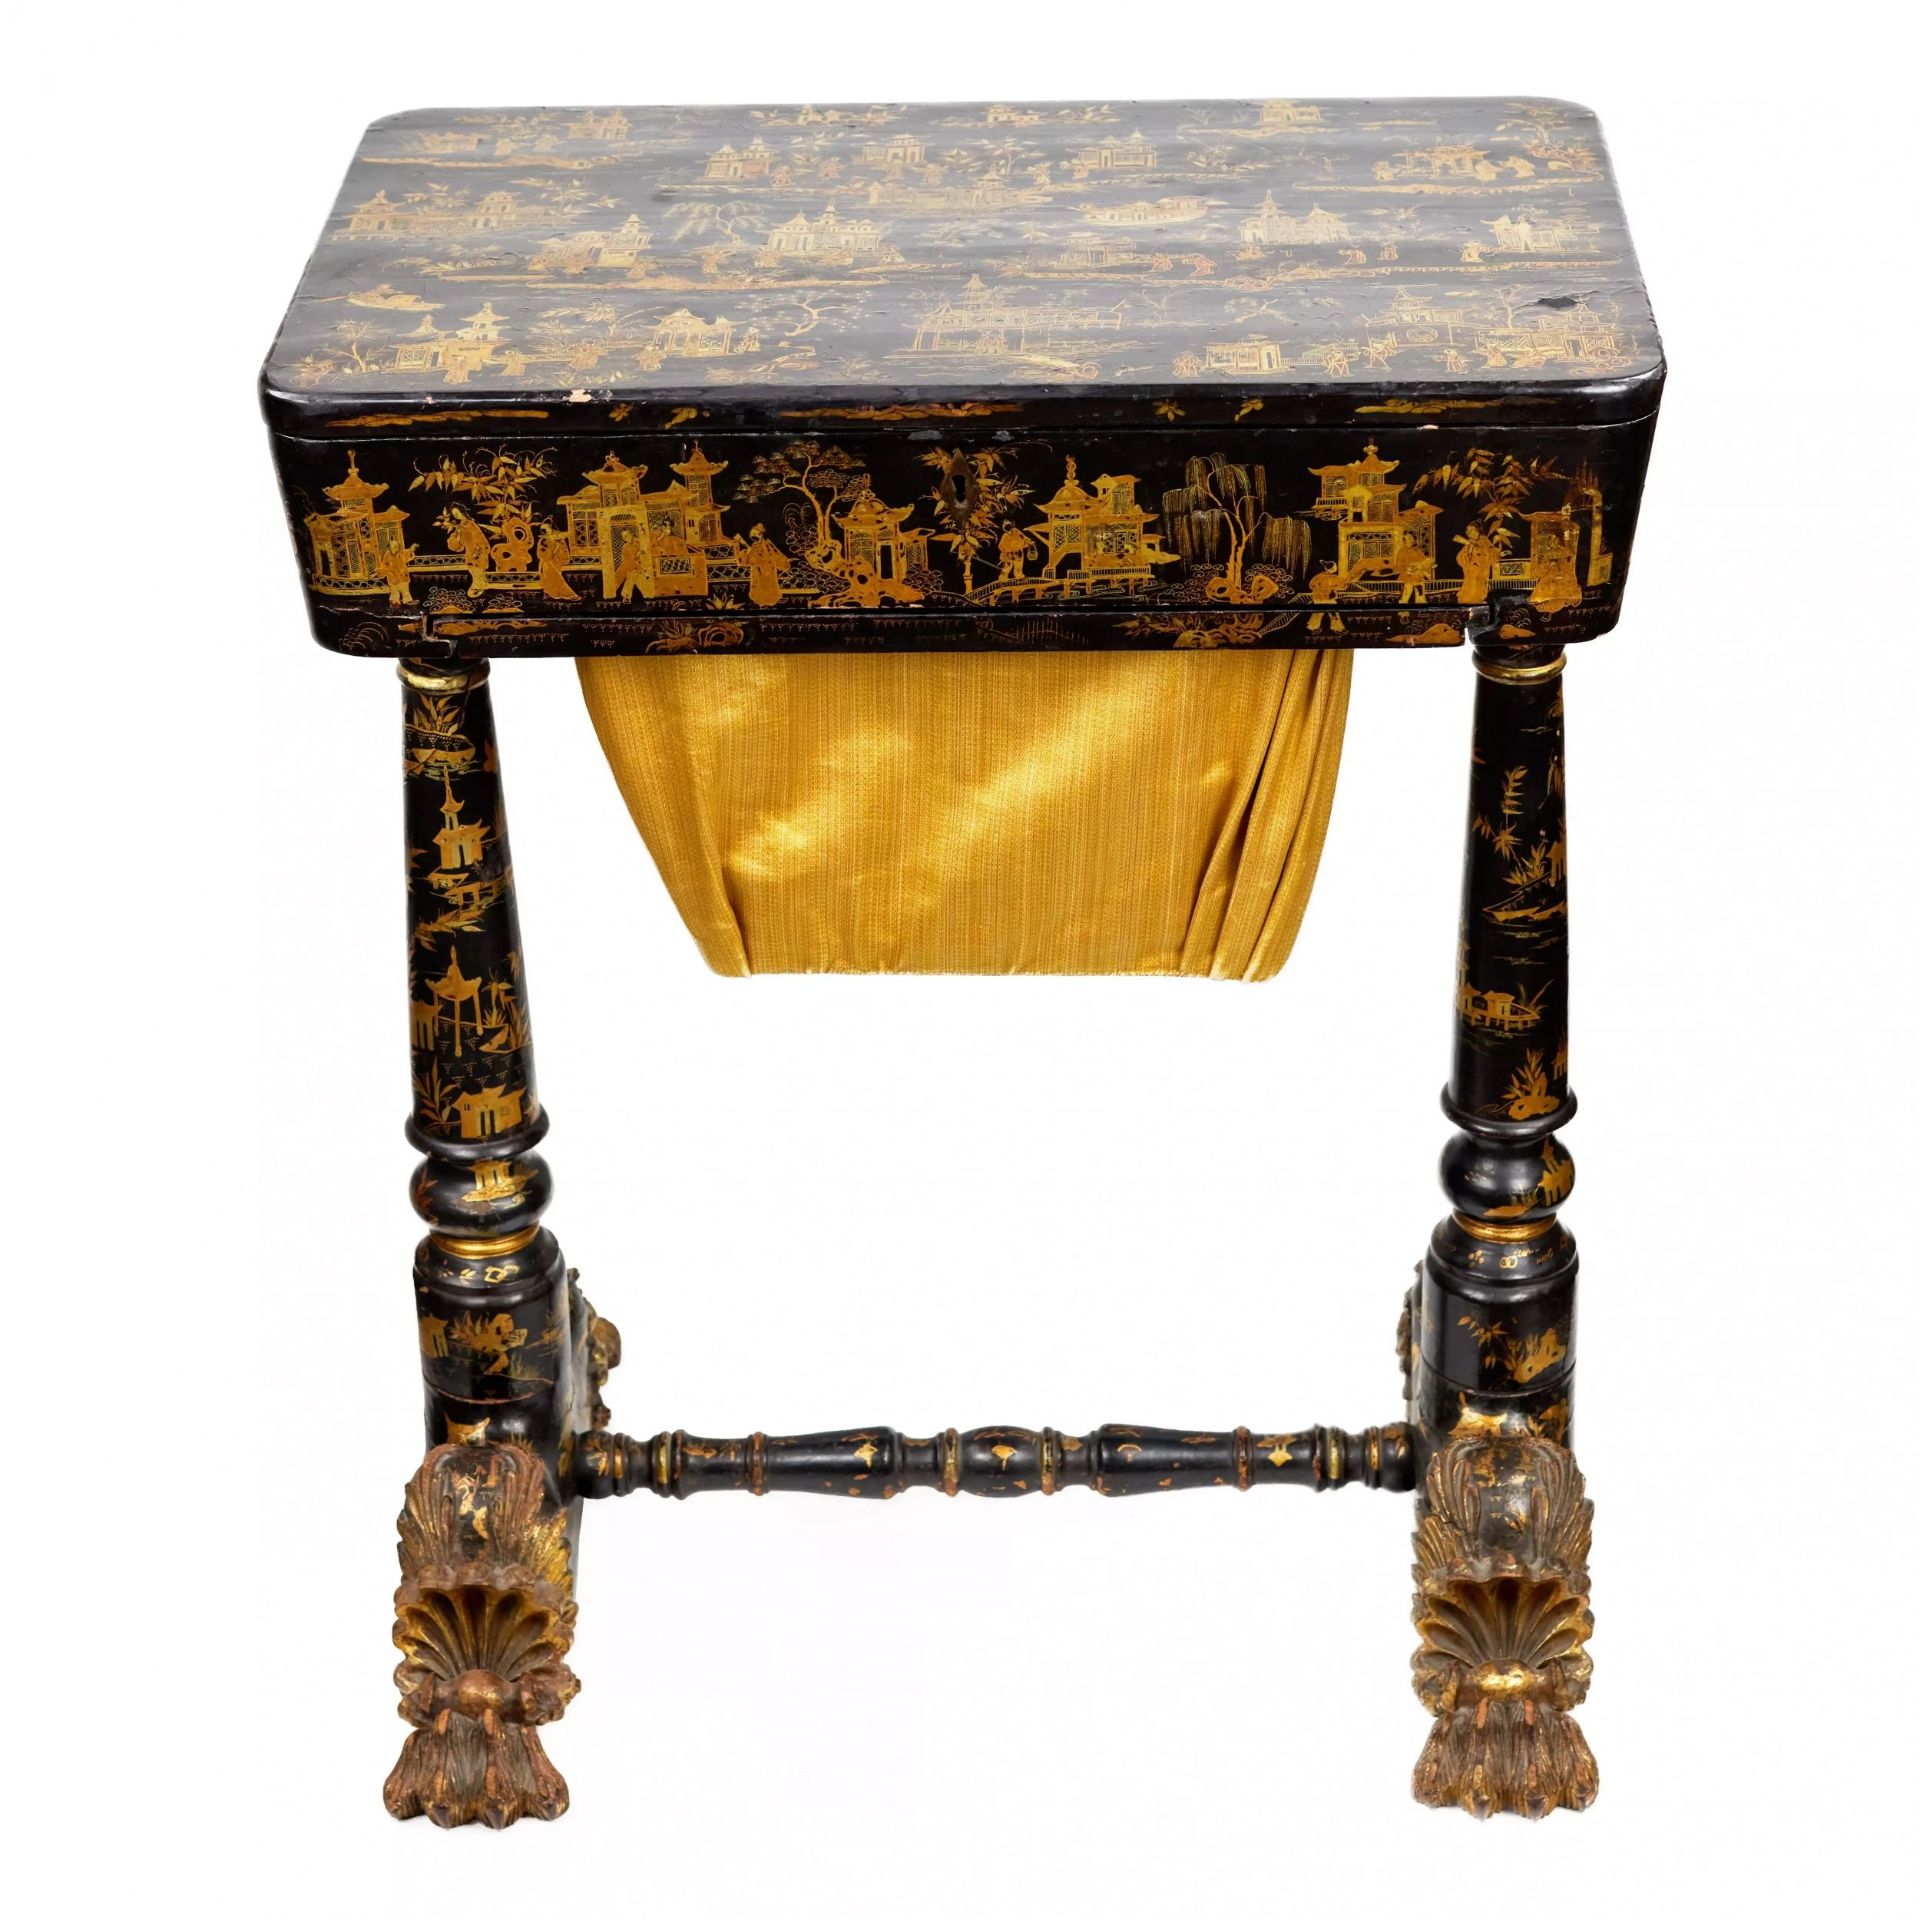 Needlework table made of black and gold Beijing lacquer. 19th century. - Image 5 of 11